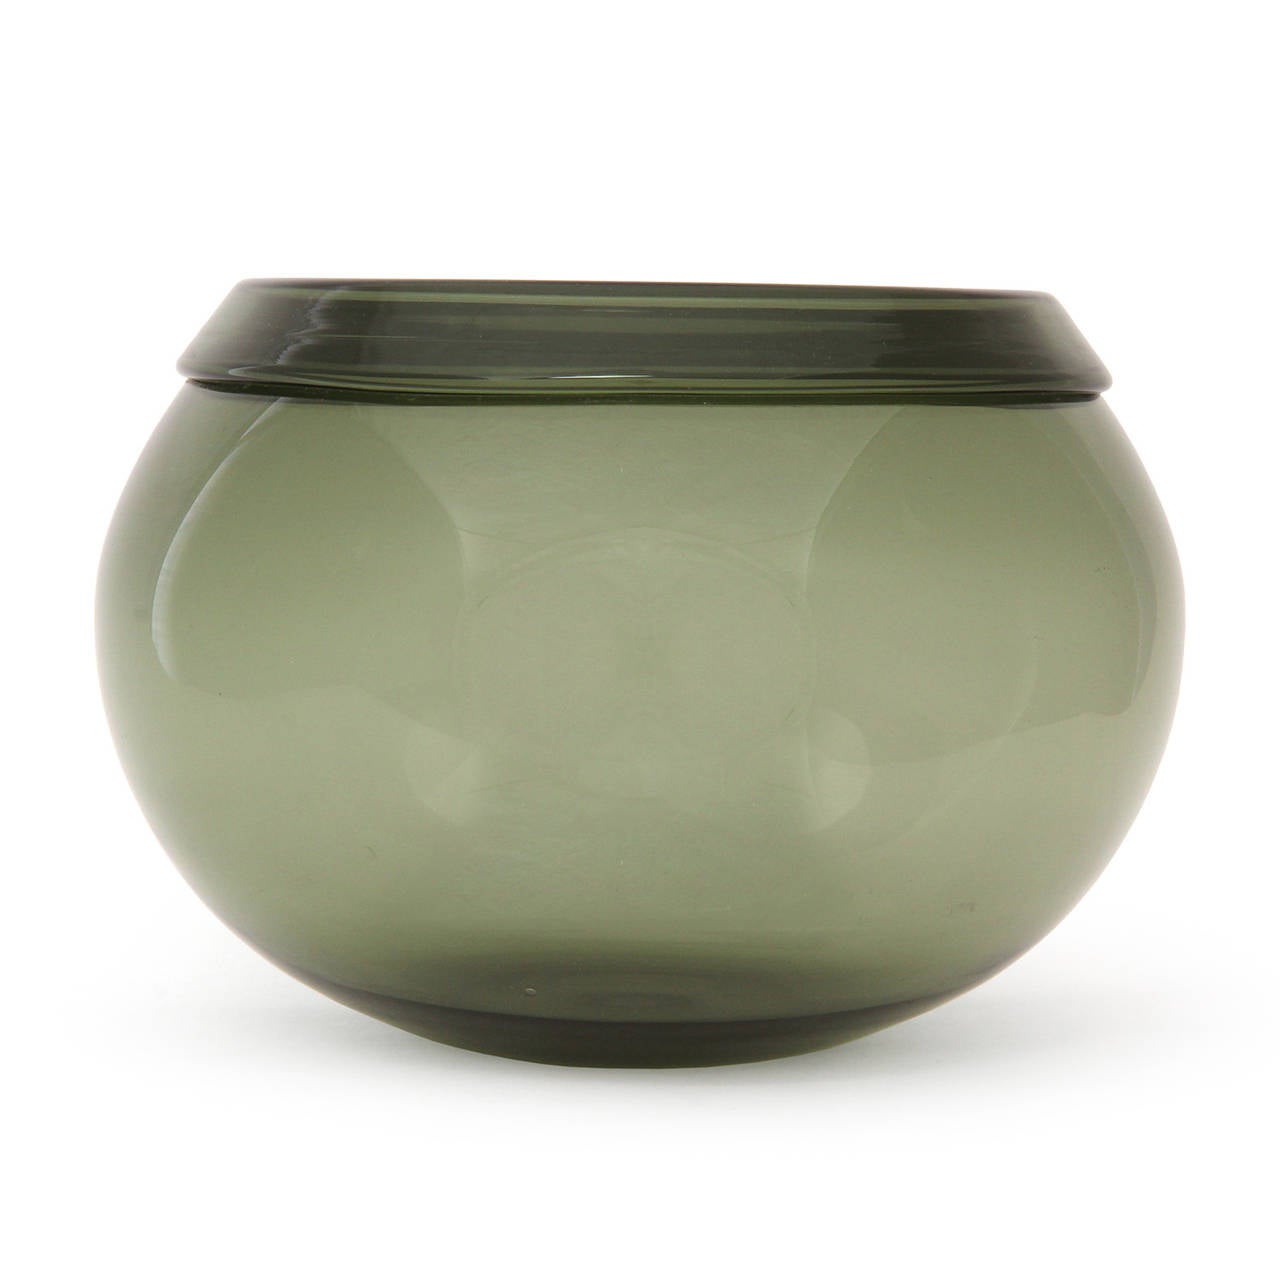 An exquisite mouth-blown vessel rendered in smokey grey-green glass having a bulbous rounded form topped with an expressive overlapping folded rim.